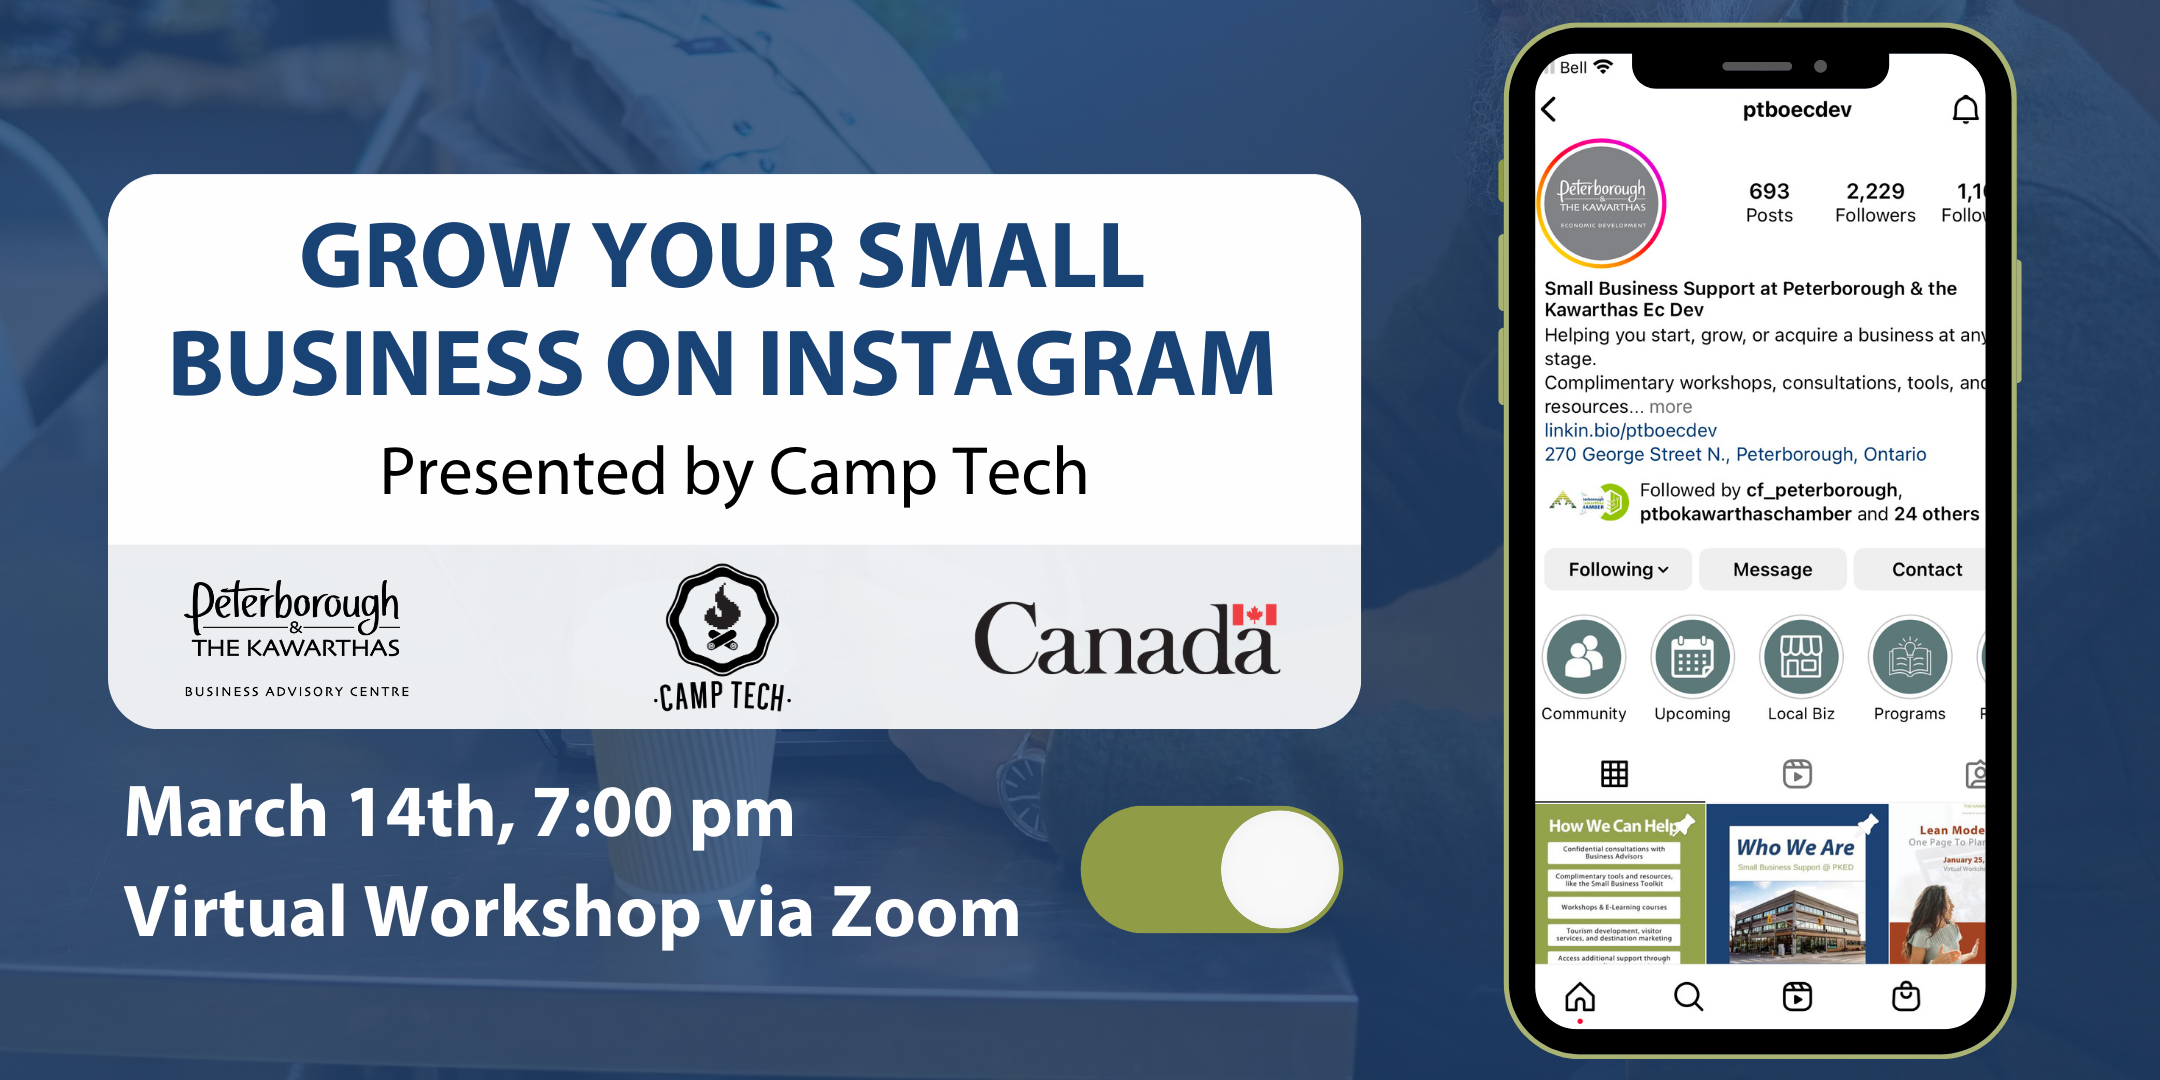 Grow Your Small Business on Instagram: Presented by Camp Tech. March 14 at 7:00pm virtually on Zoom